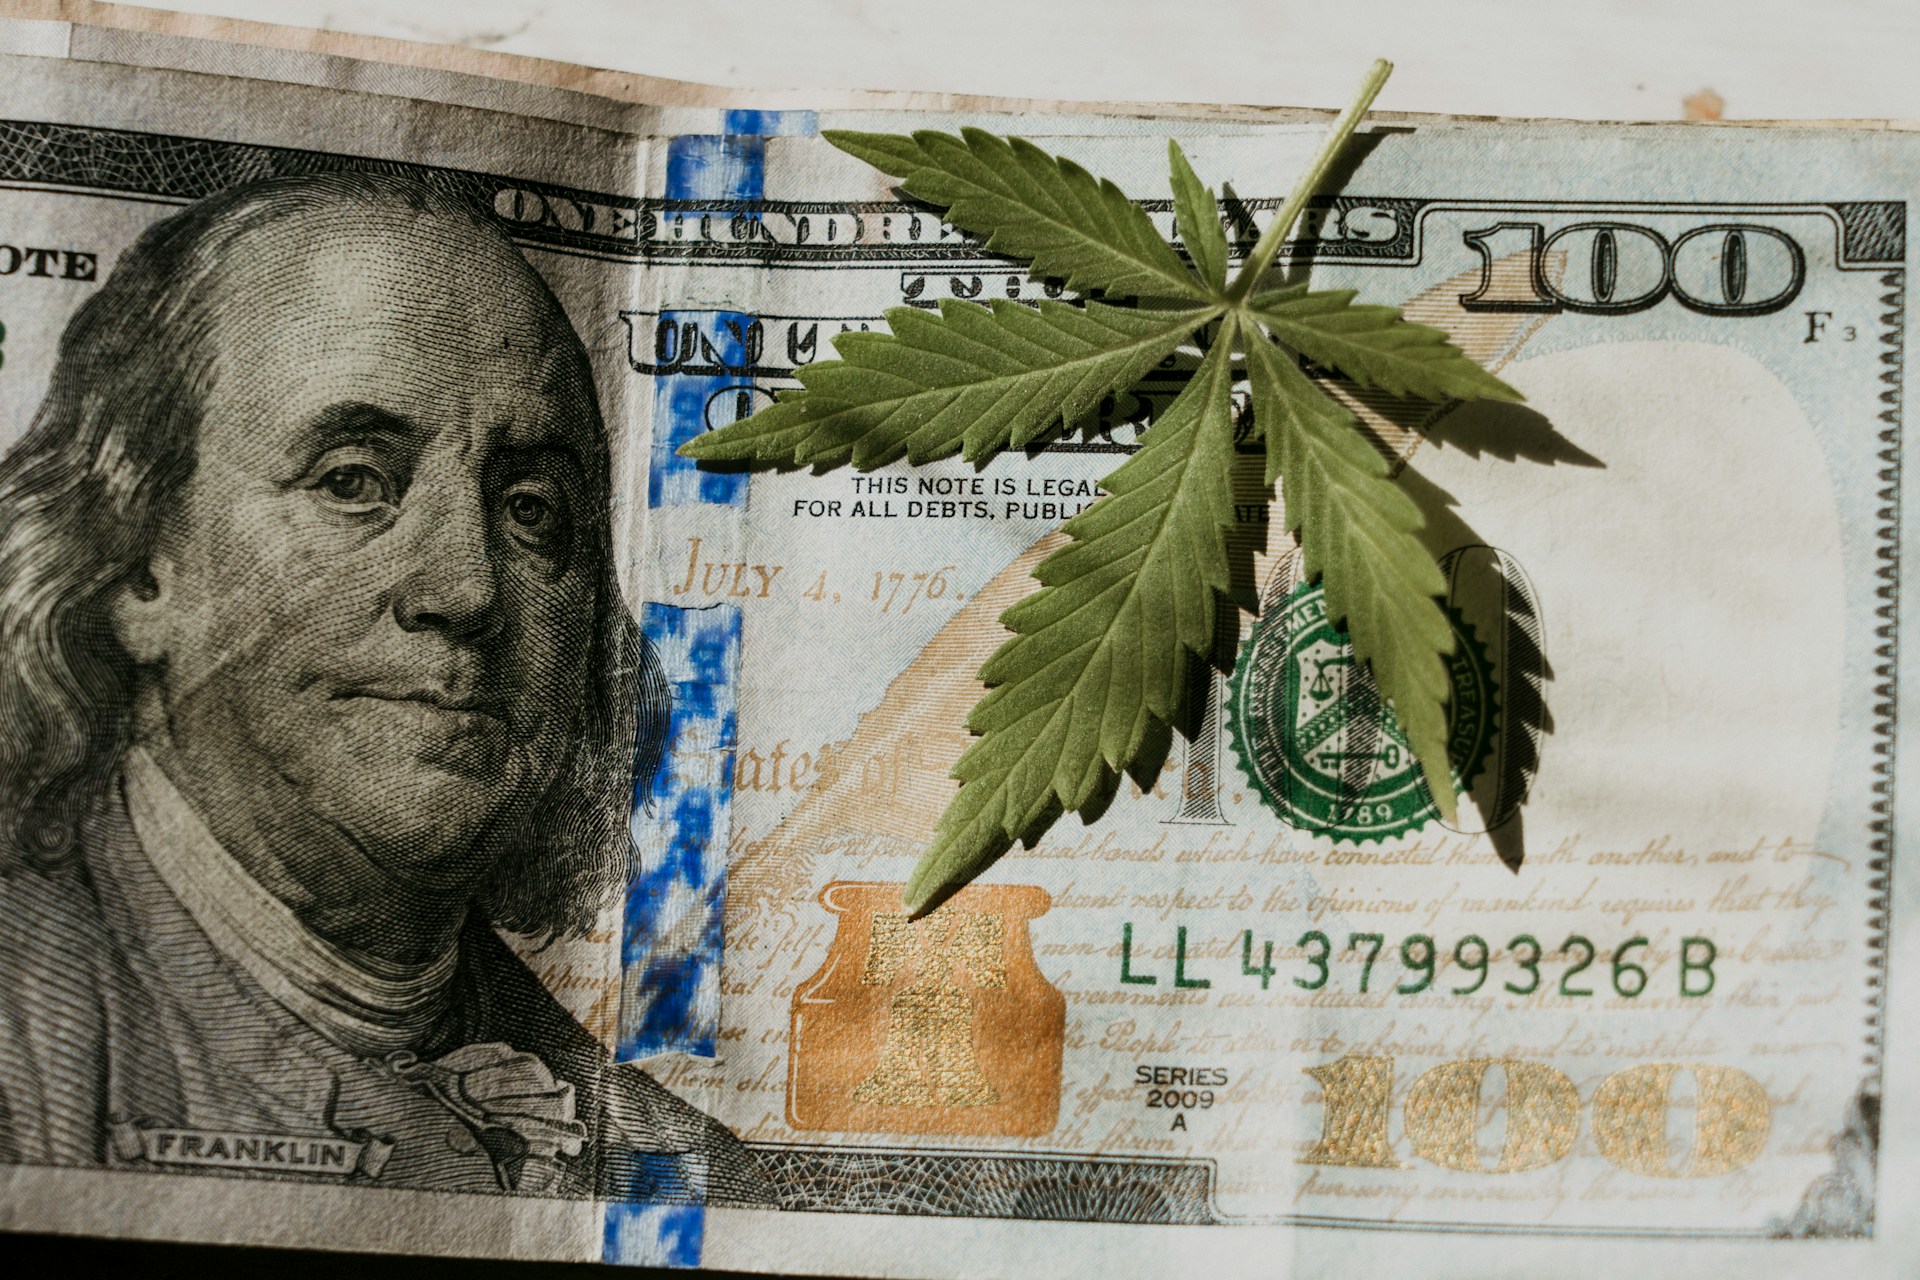 Cannabis Rescheduling to Provide Tax Relief, More Critical Reforms Stuck in Congressional Gridlock